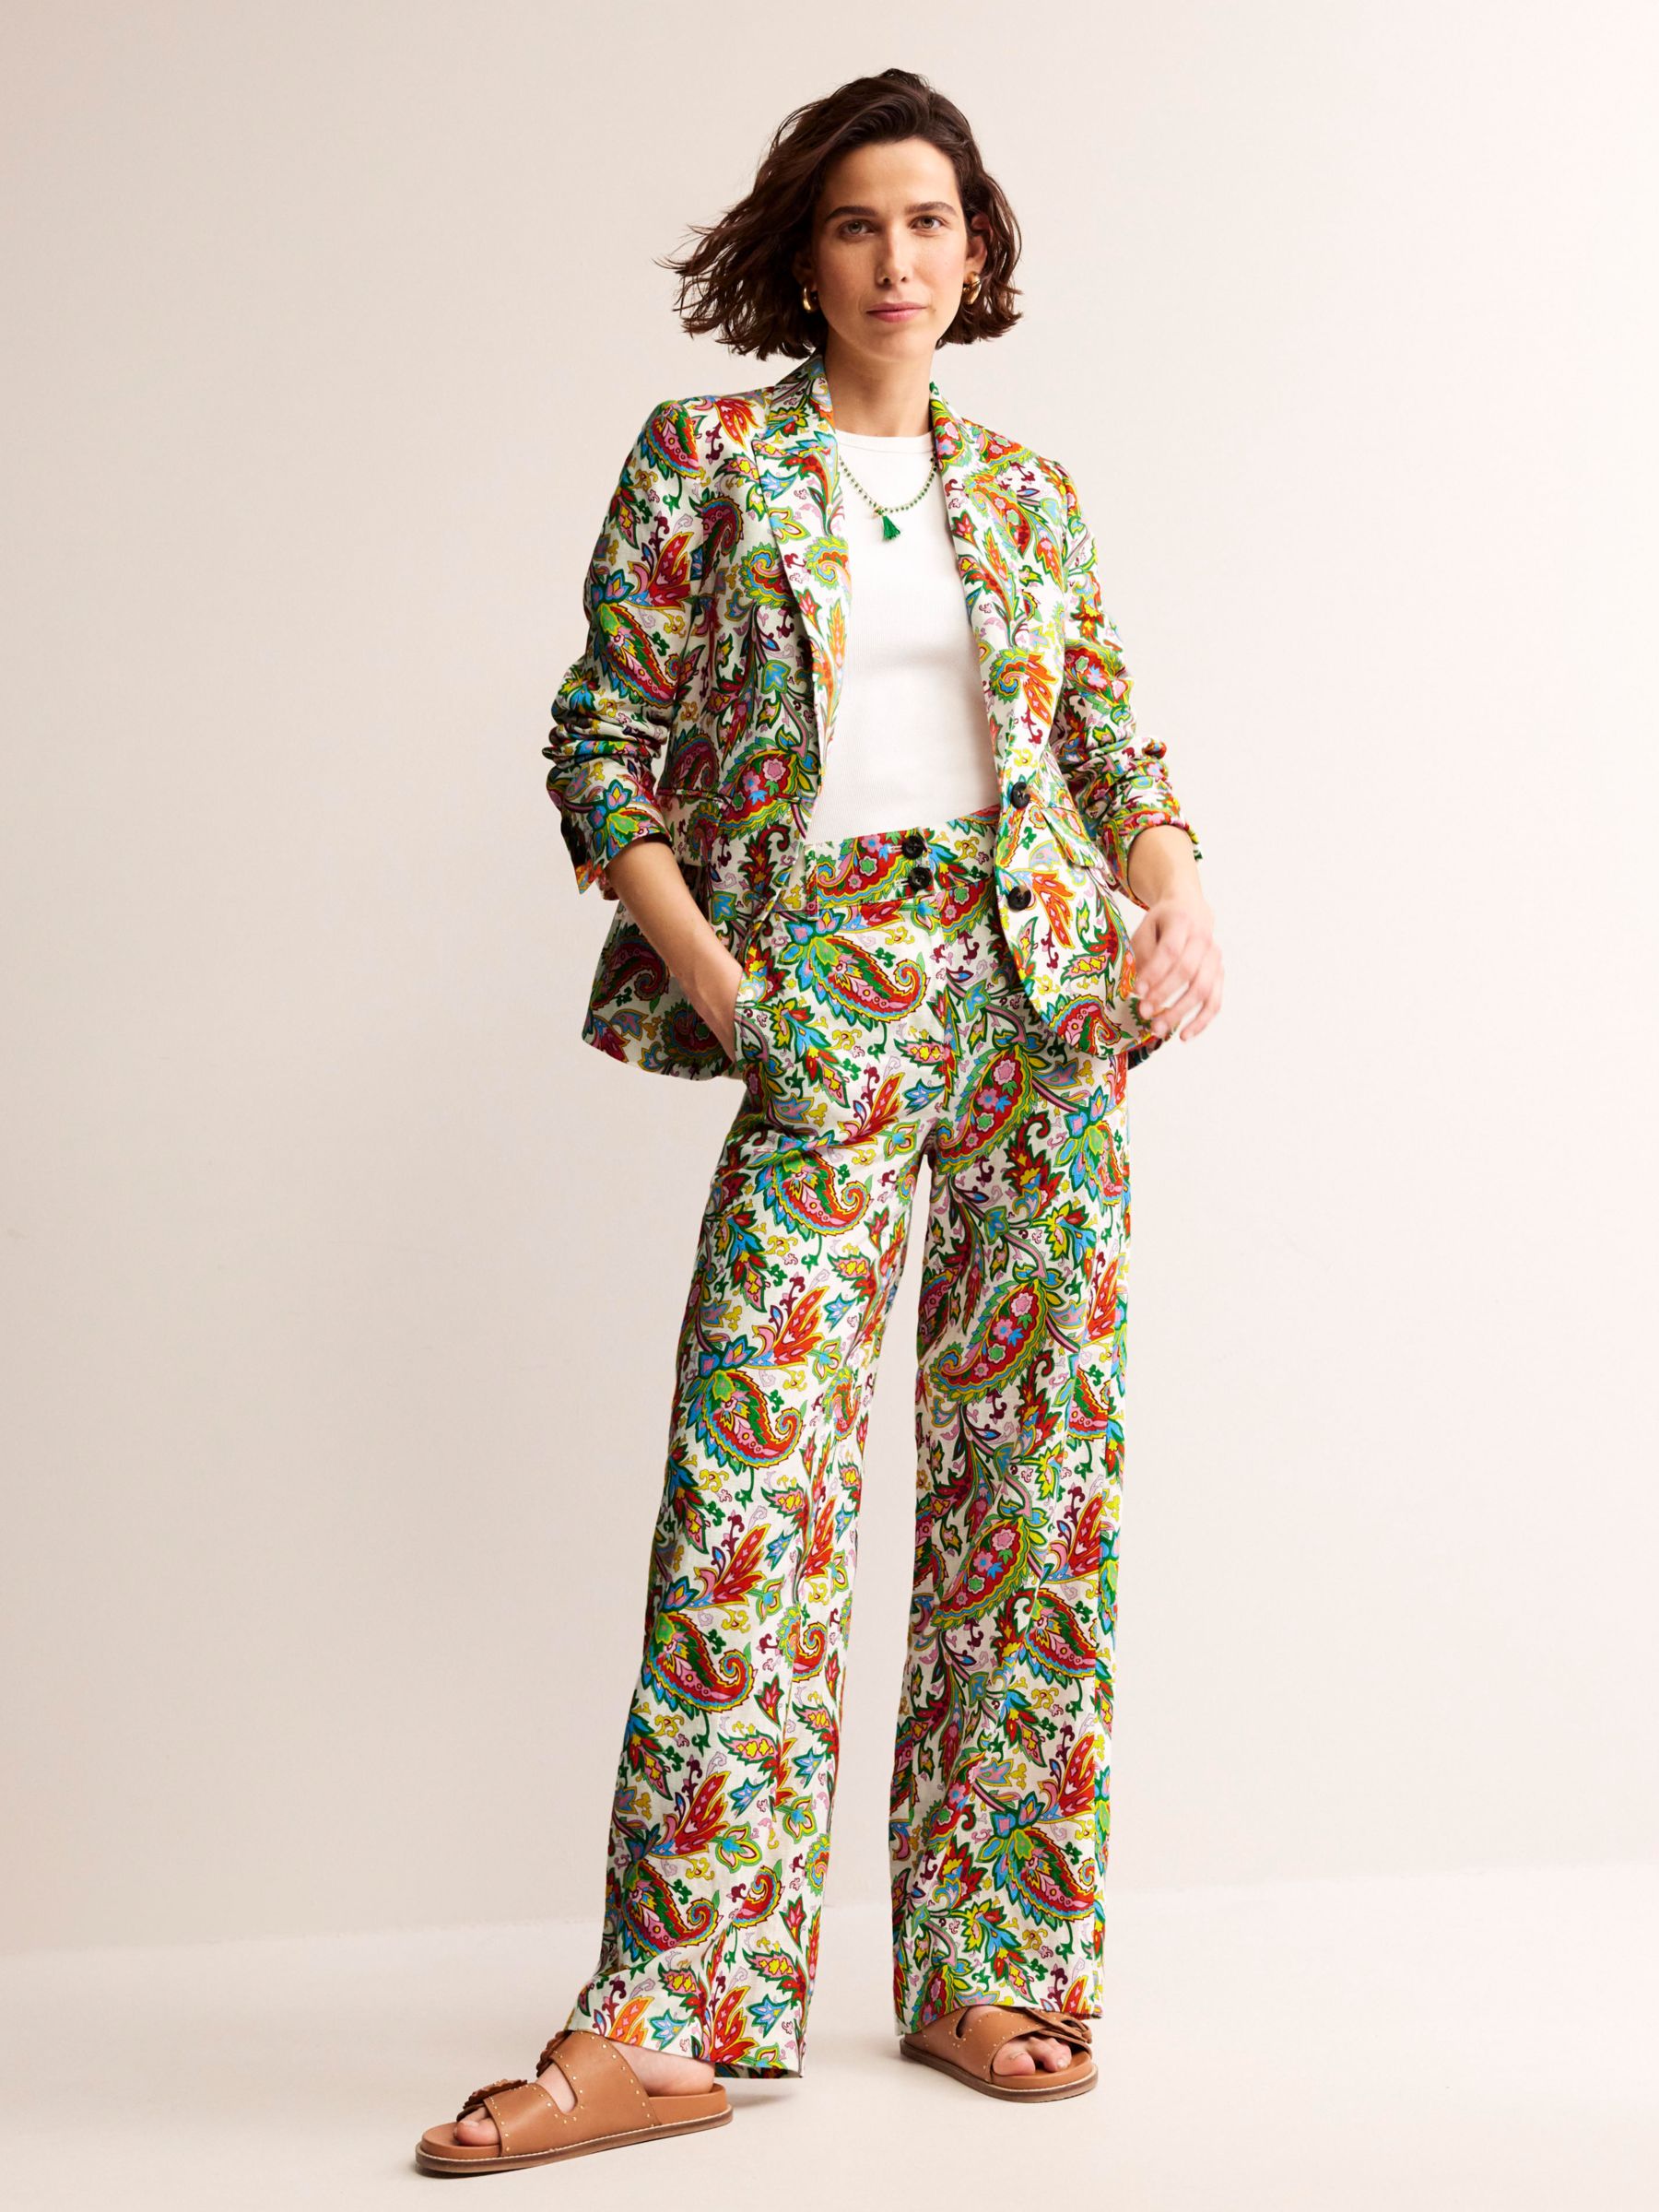 Buy Boden Westbourne Paisley Print Linen Trousers, Ivory/Multi Online at johnlewis.com